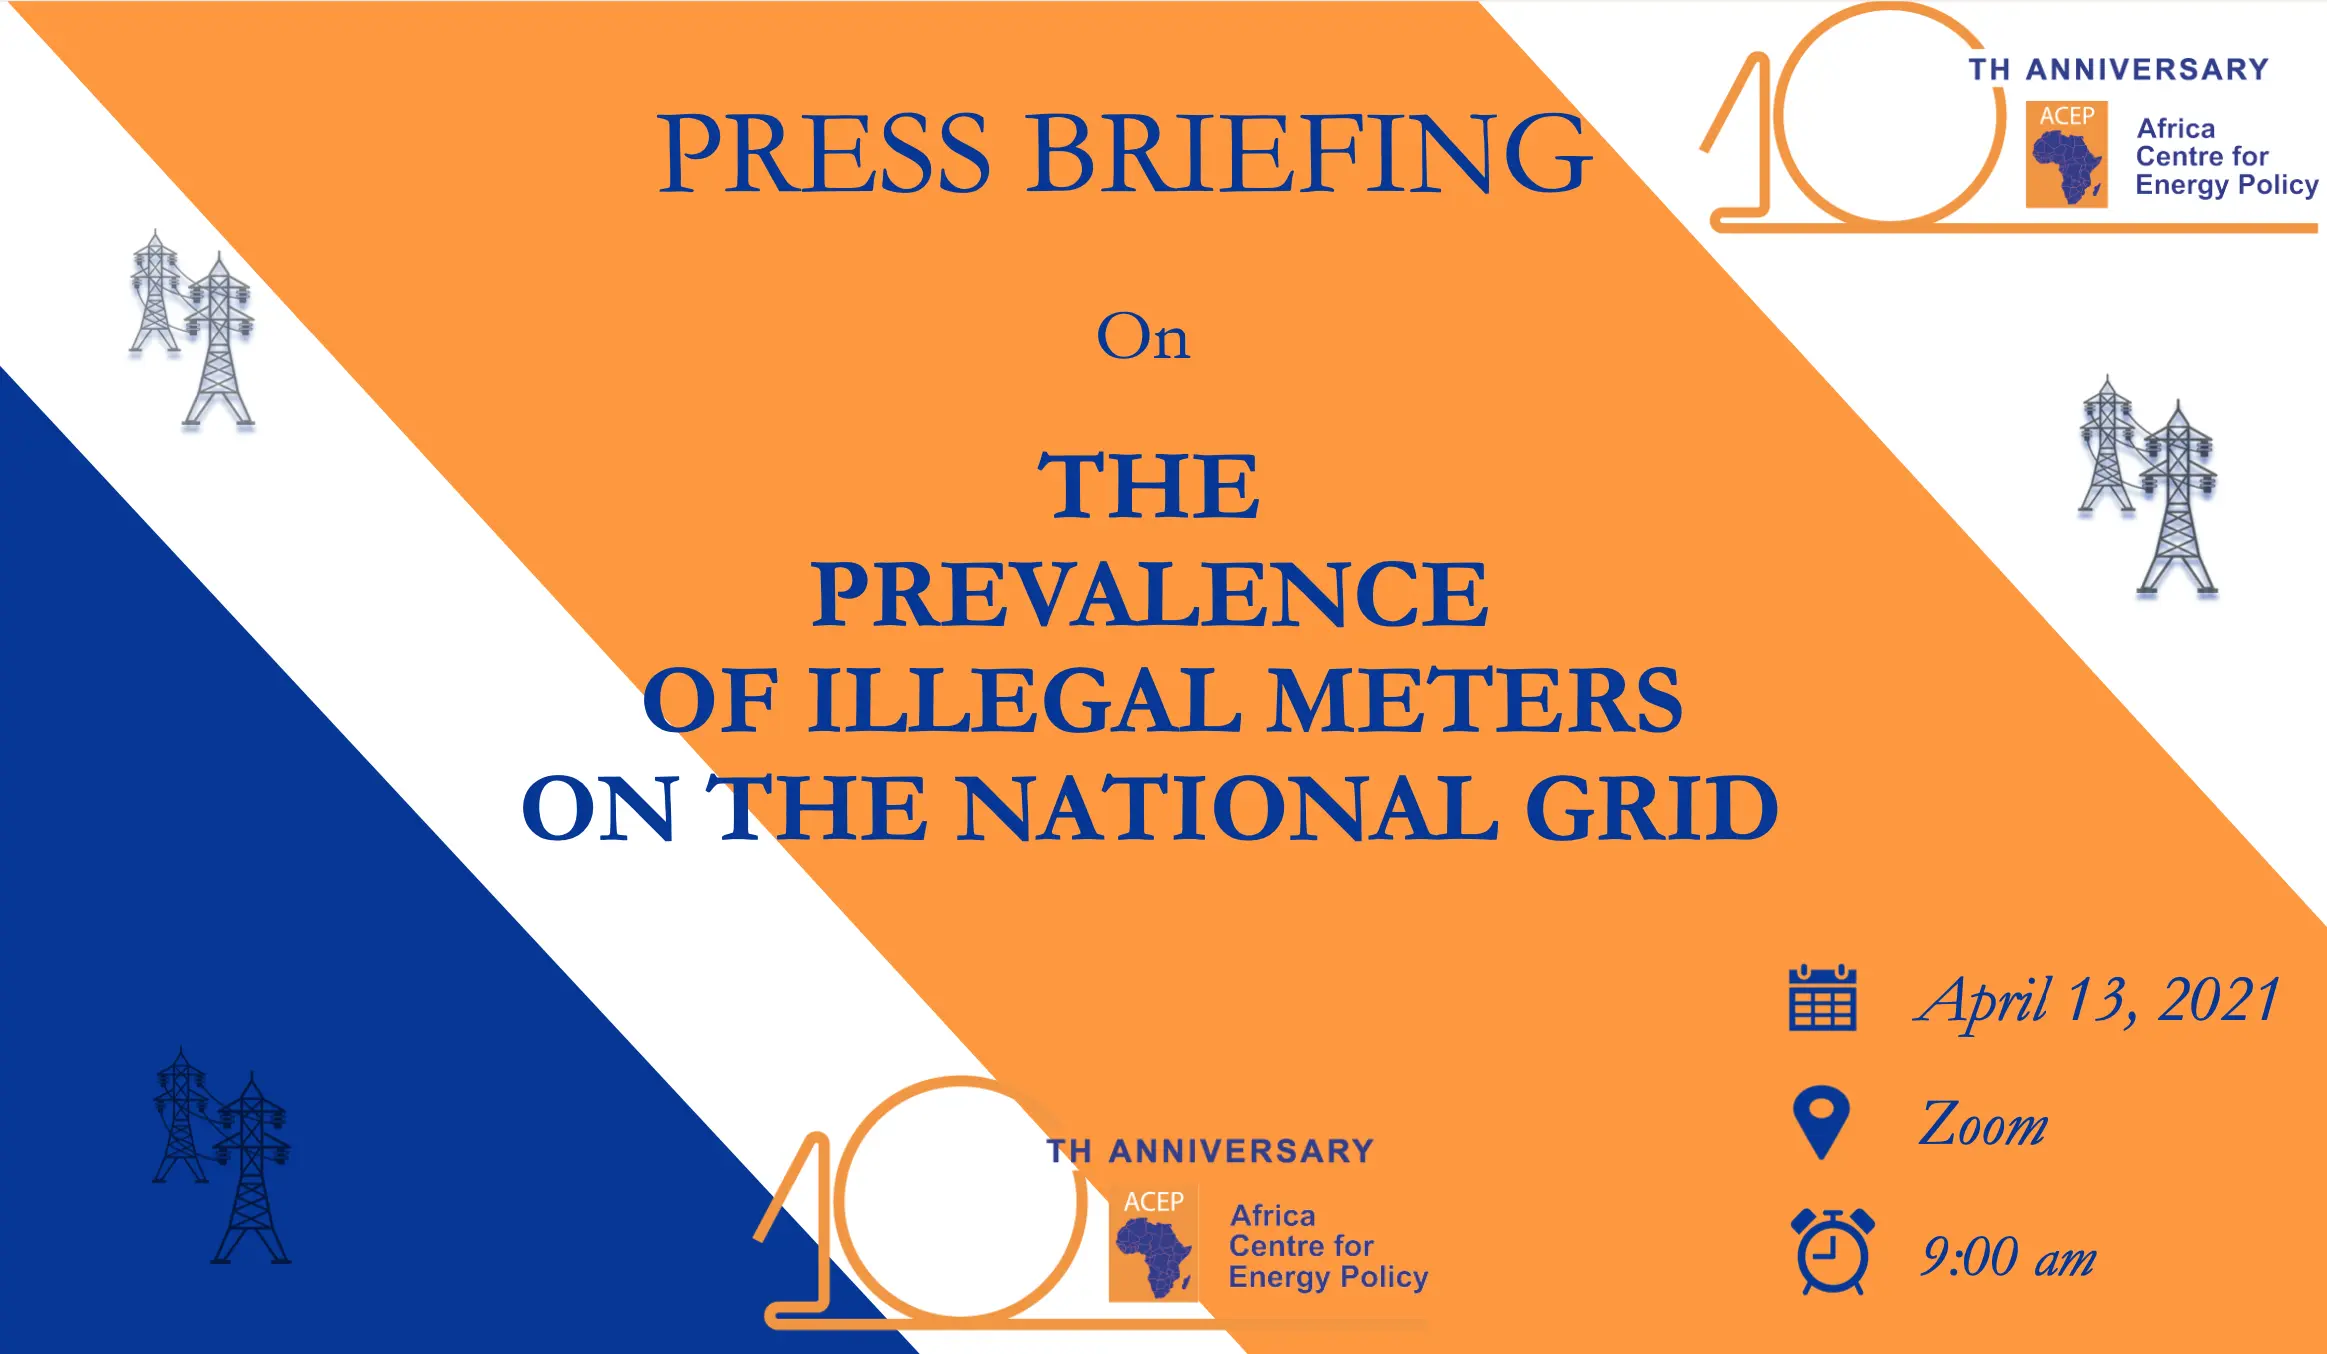 Press Briefing On The Prevalence Of Illegal Meters On The National Grid